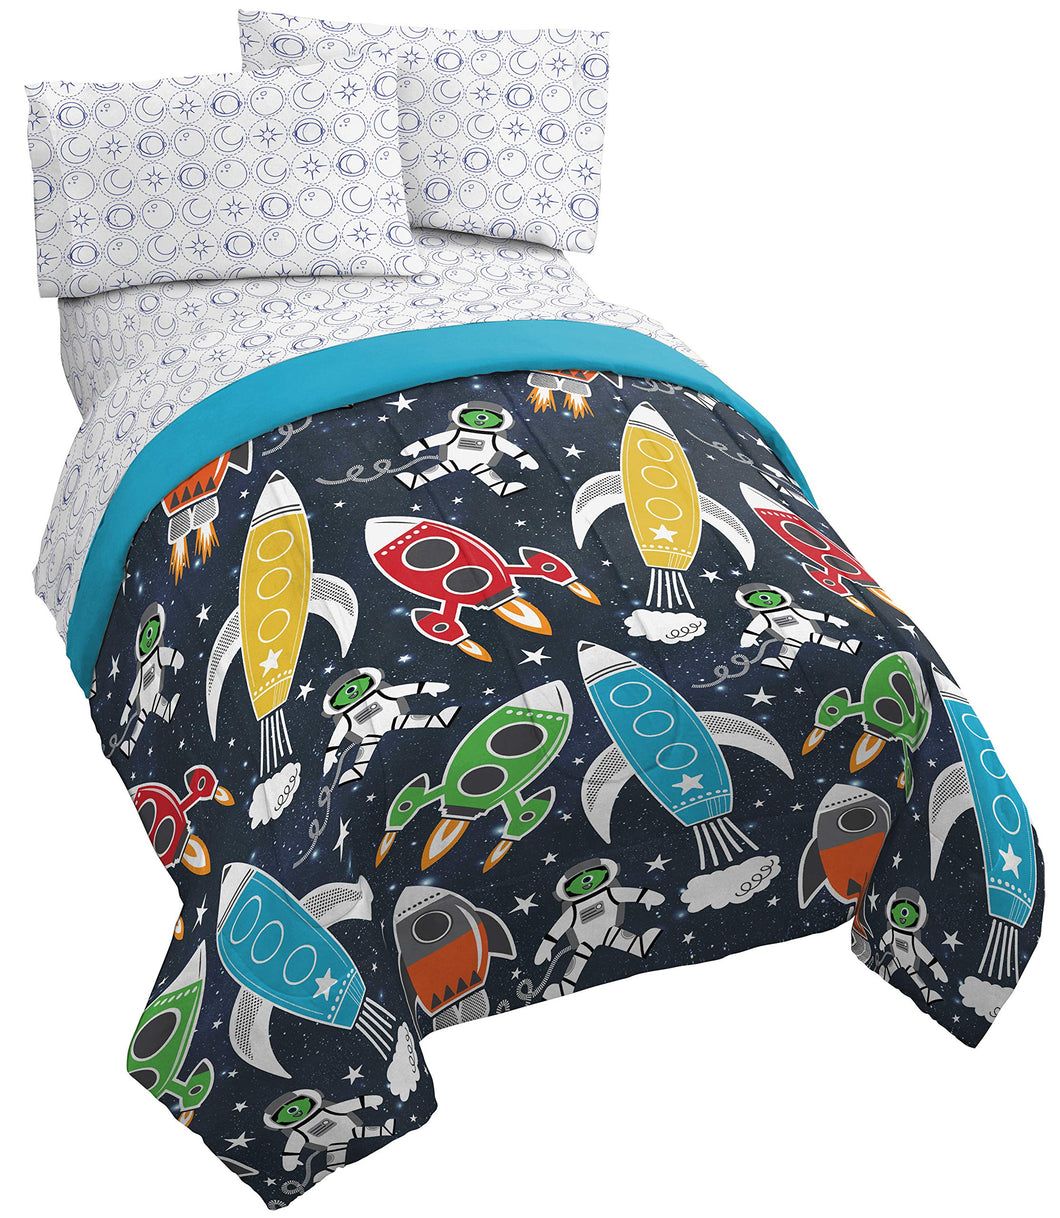 Jay Franco Space 4 Piece Twin Bed Set - Includes Comforter & Sheet Set- Bedding Features Spaceships & Rocketships - Super Soft Fade Resistant Microfiber